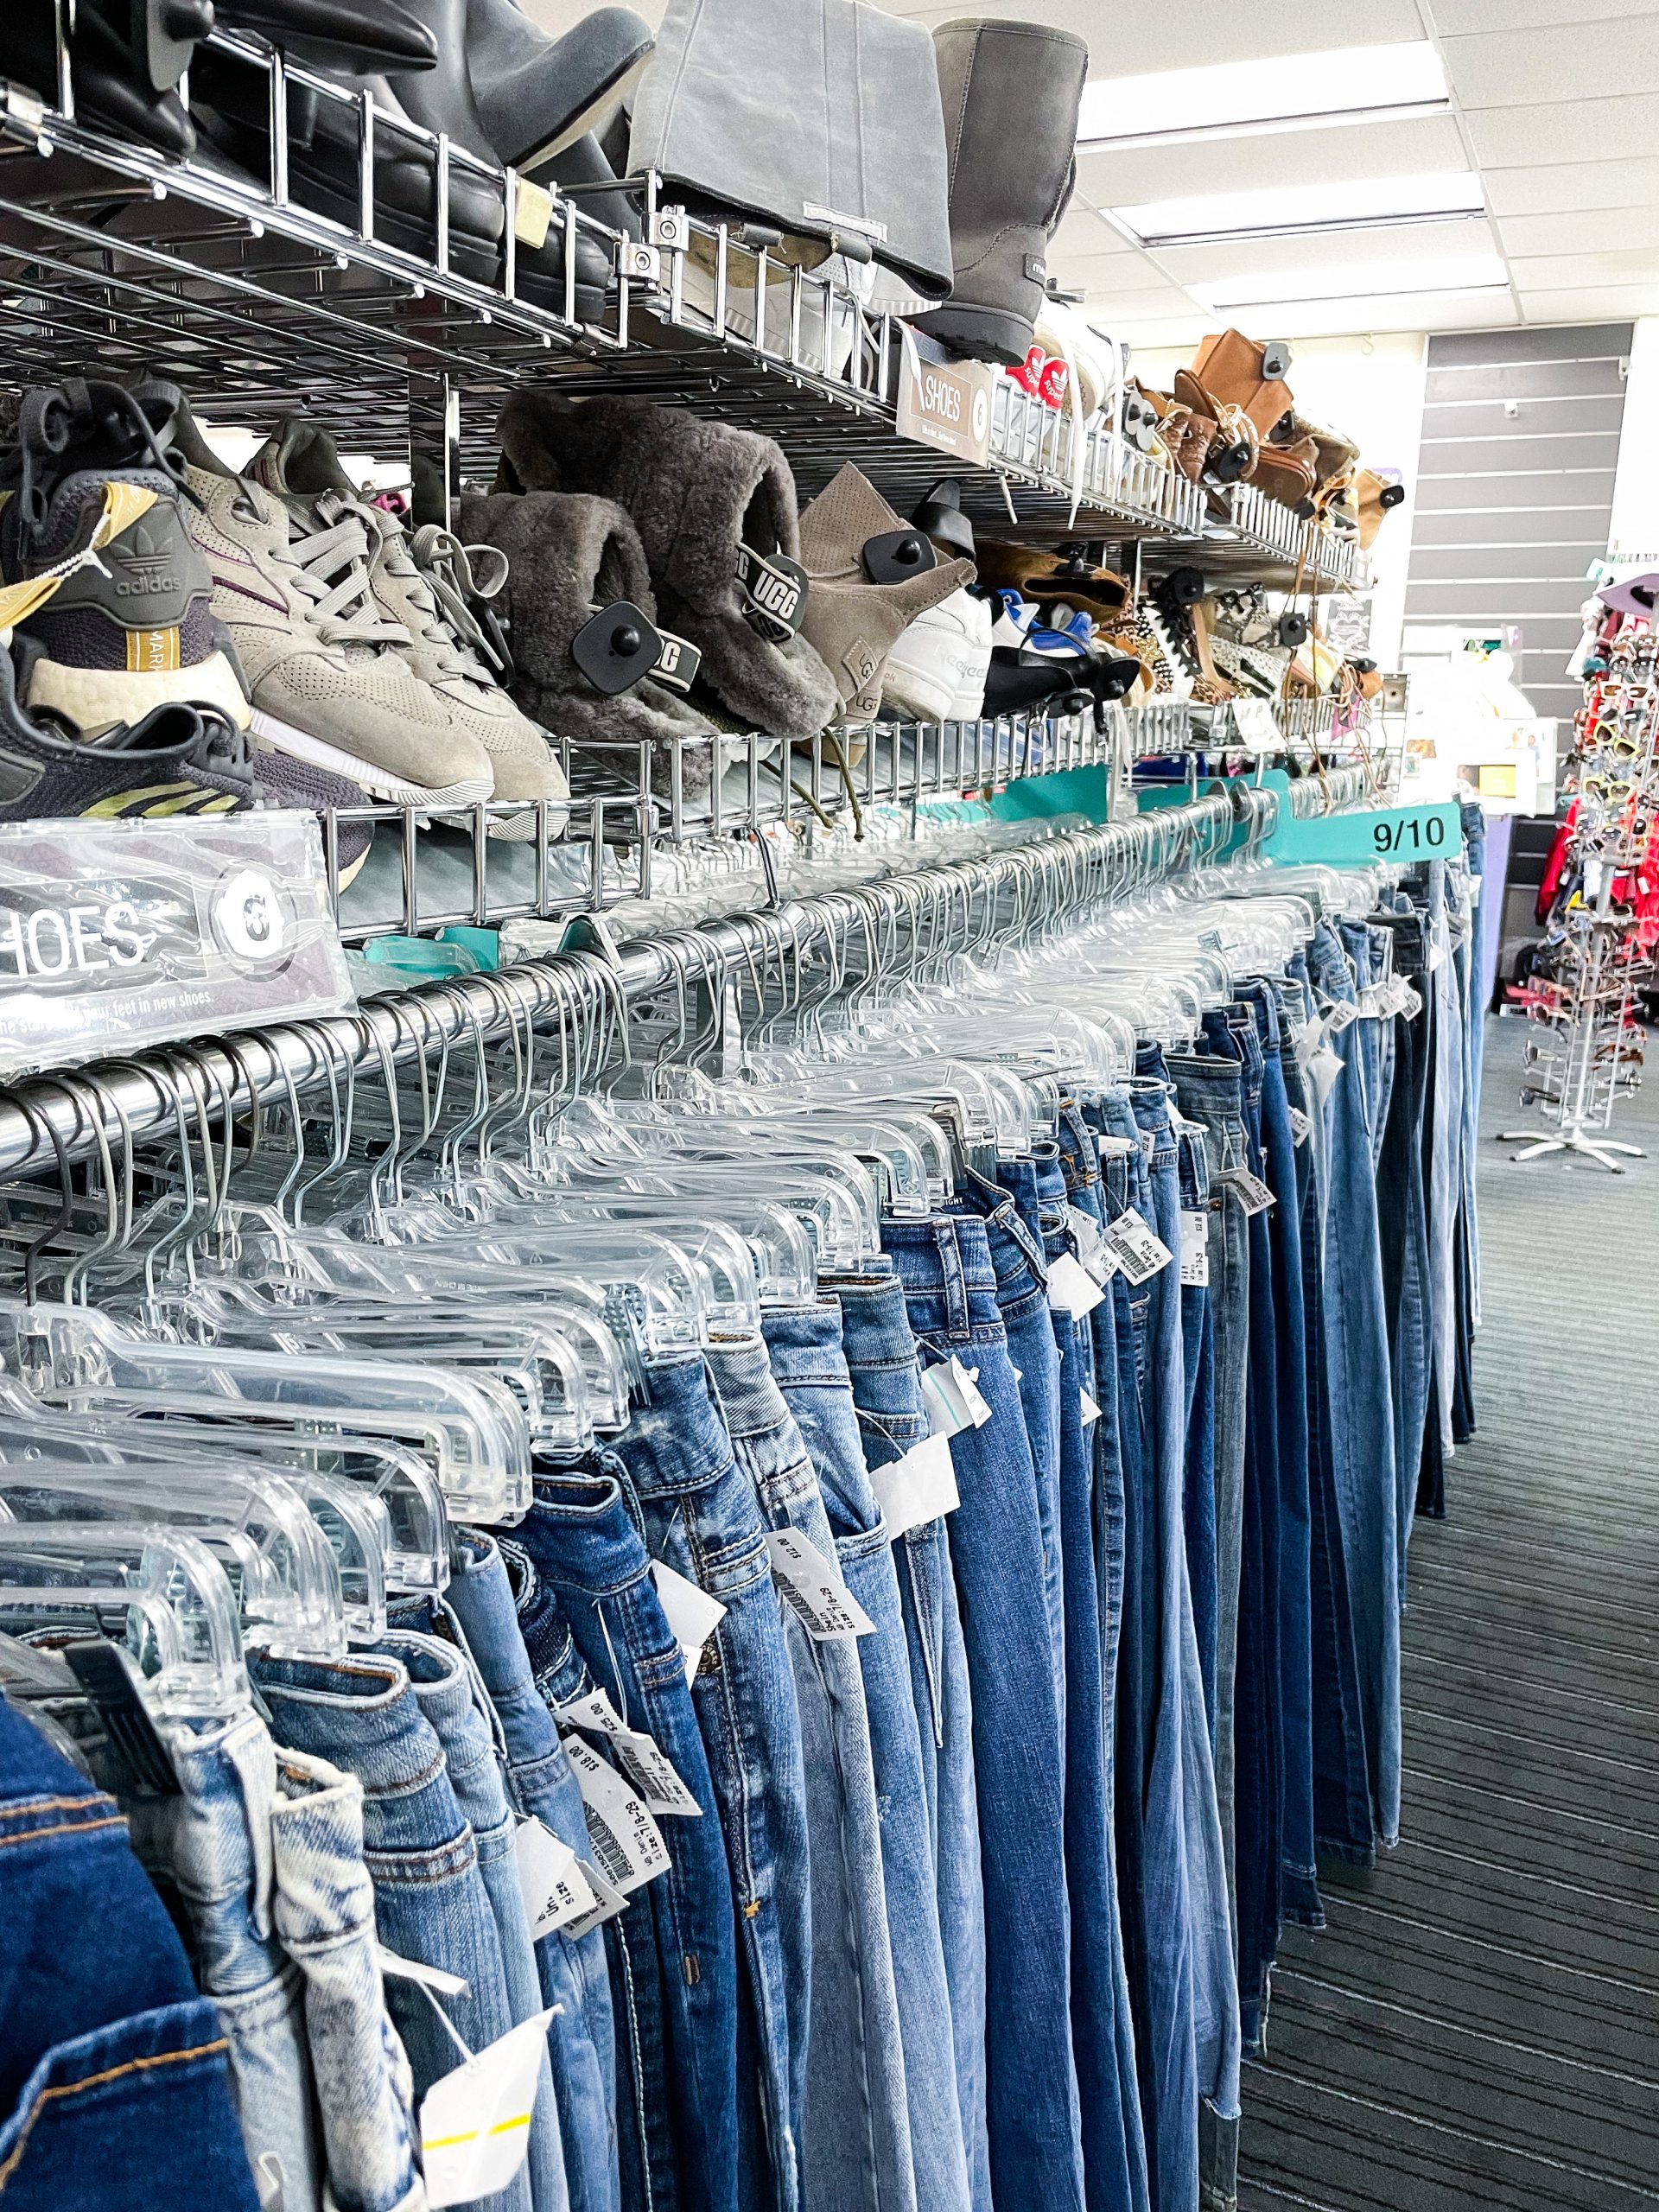 The Difference Between Buy-Sell-Trade, Thrift, and Consignment